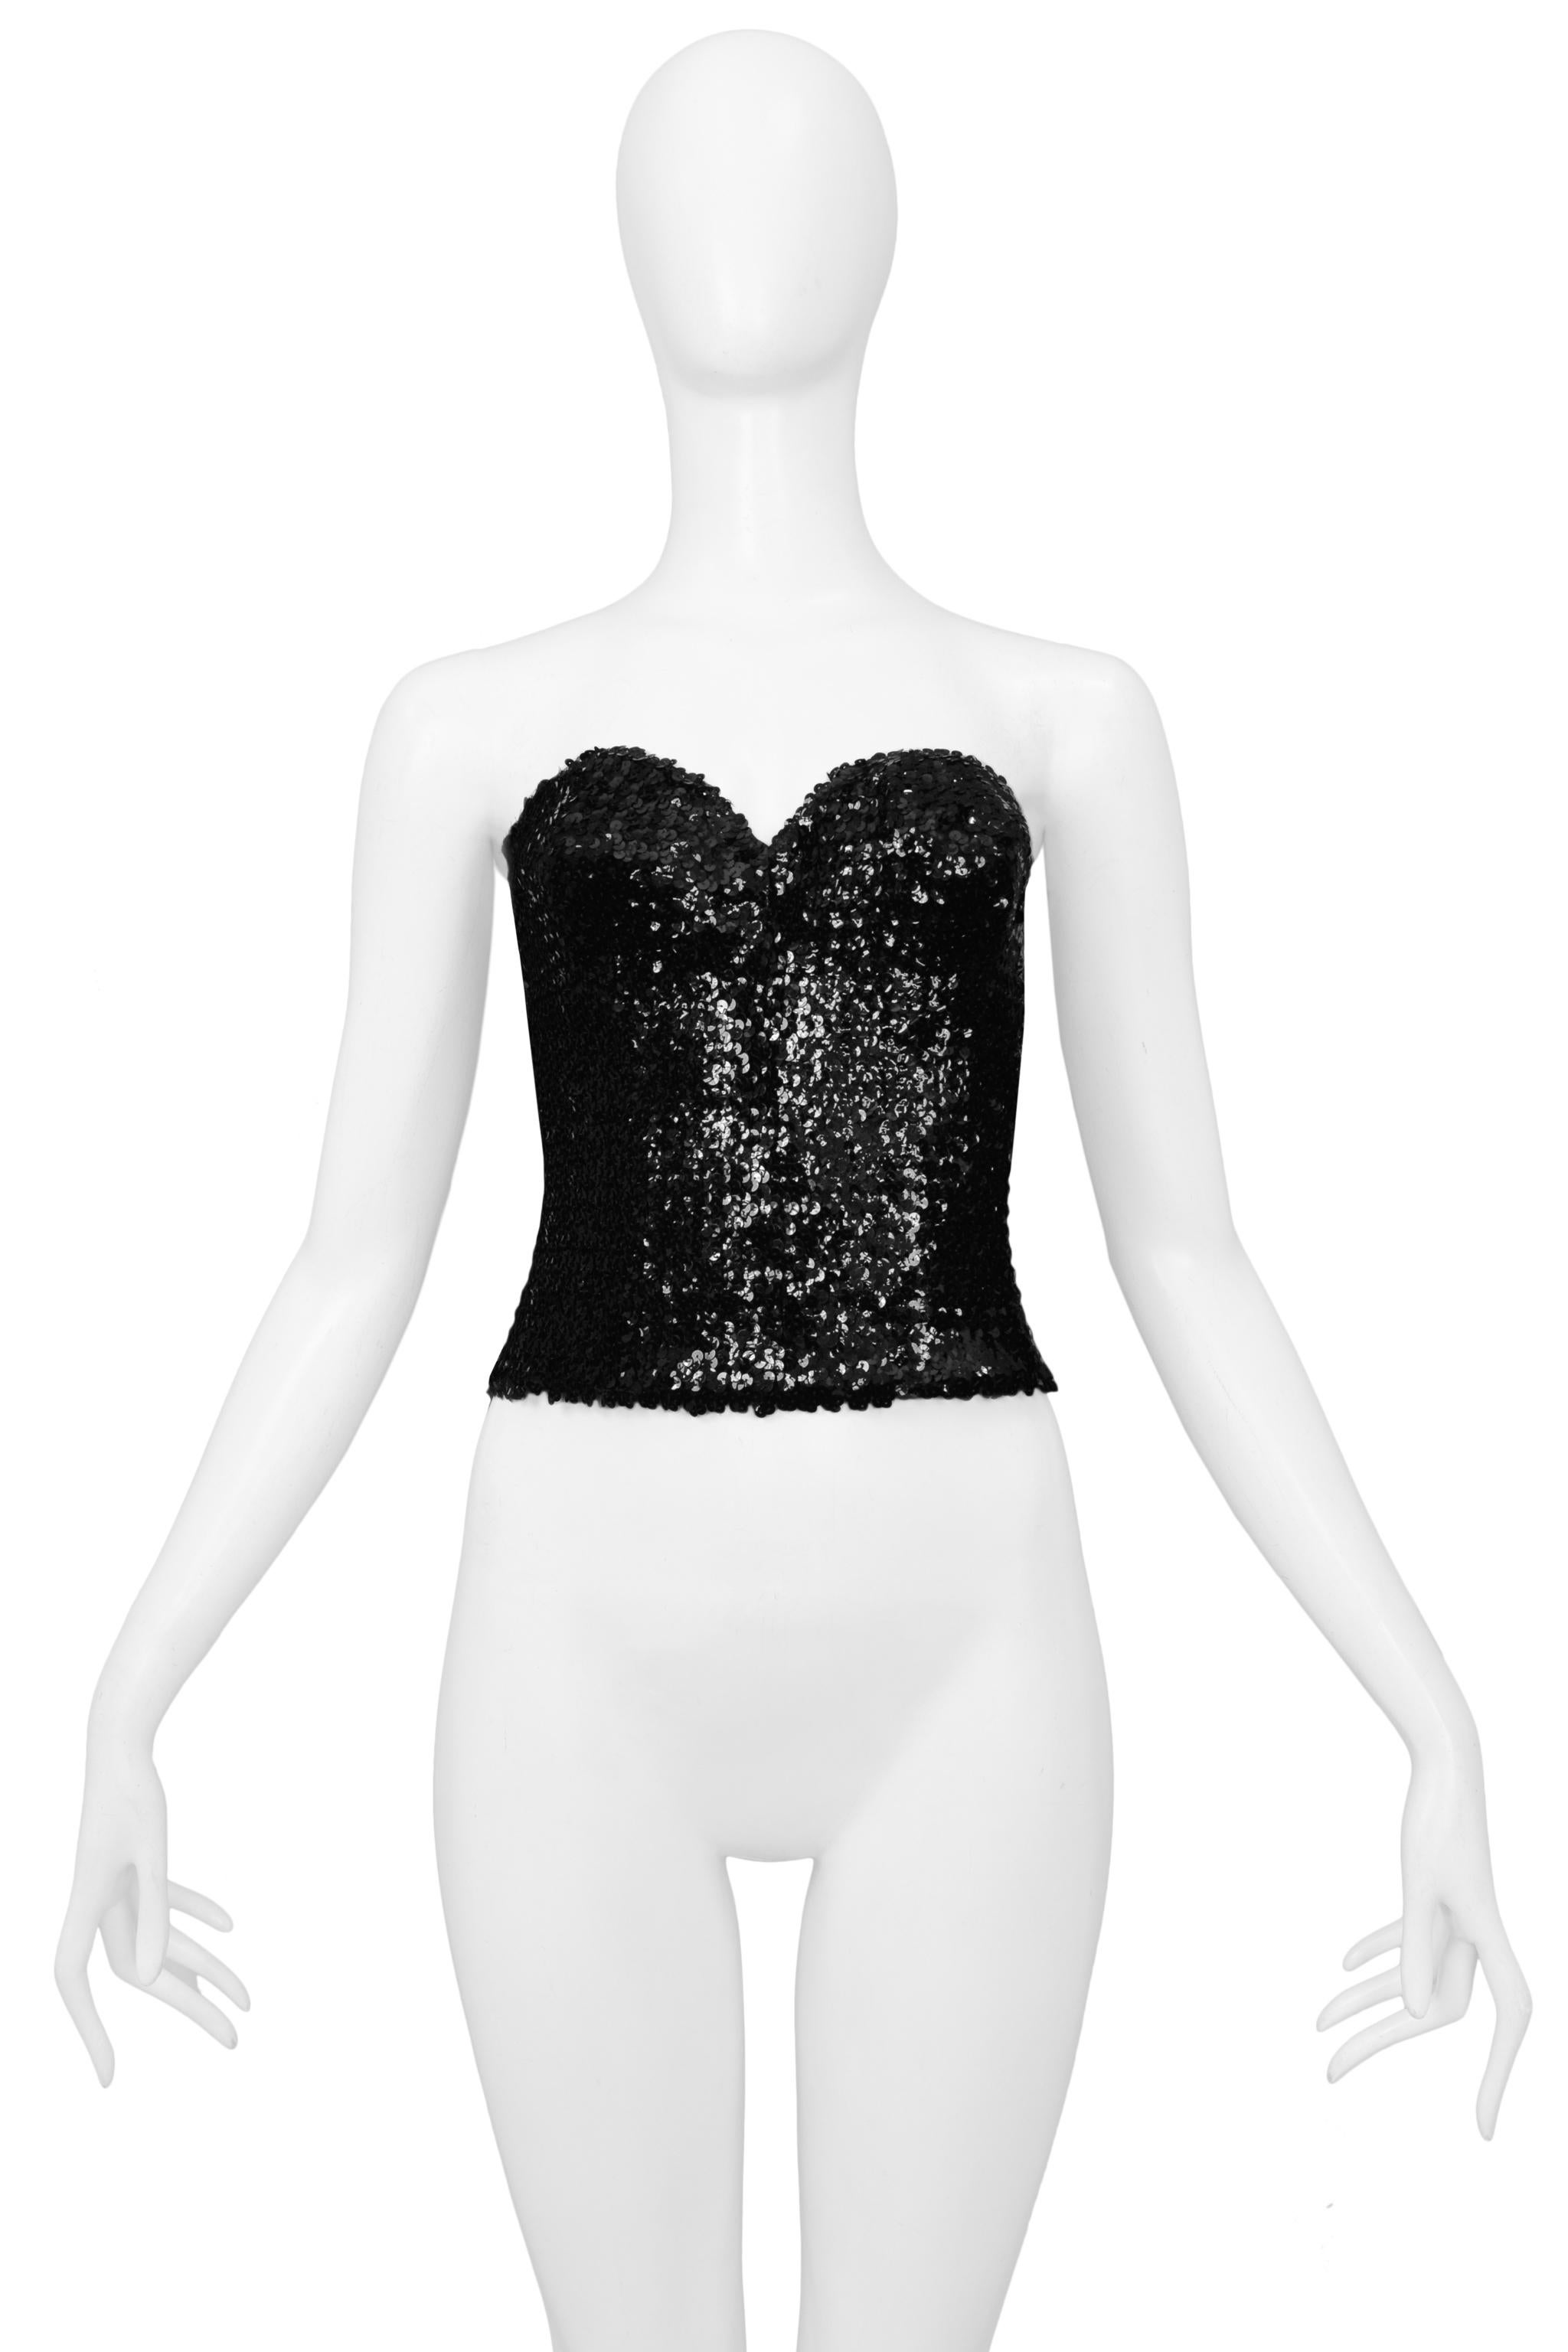 Resurrection Vintage is excited to present a vintage La Perla black sequin bustier featuring sculpted cups and a back center zipper. 

La Perla
Size: M
Sequin and Elastic
Excellent Vintage Condition 
Authenticity Guaranteed 